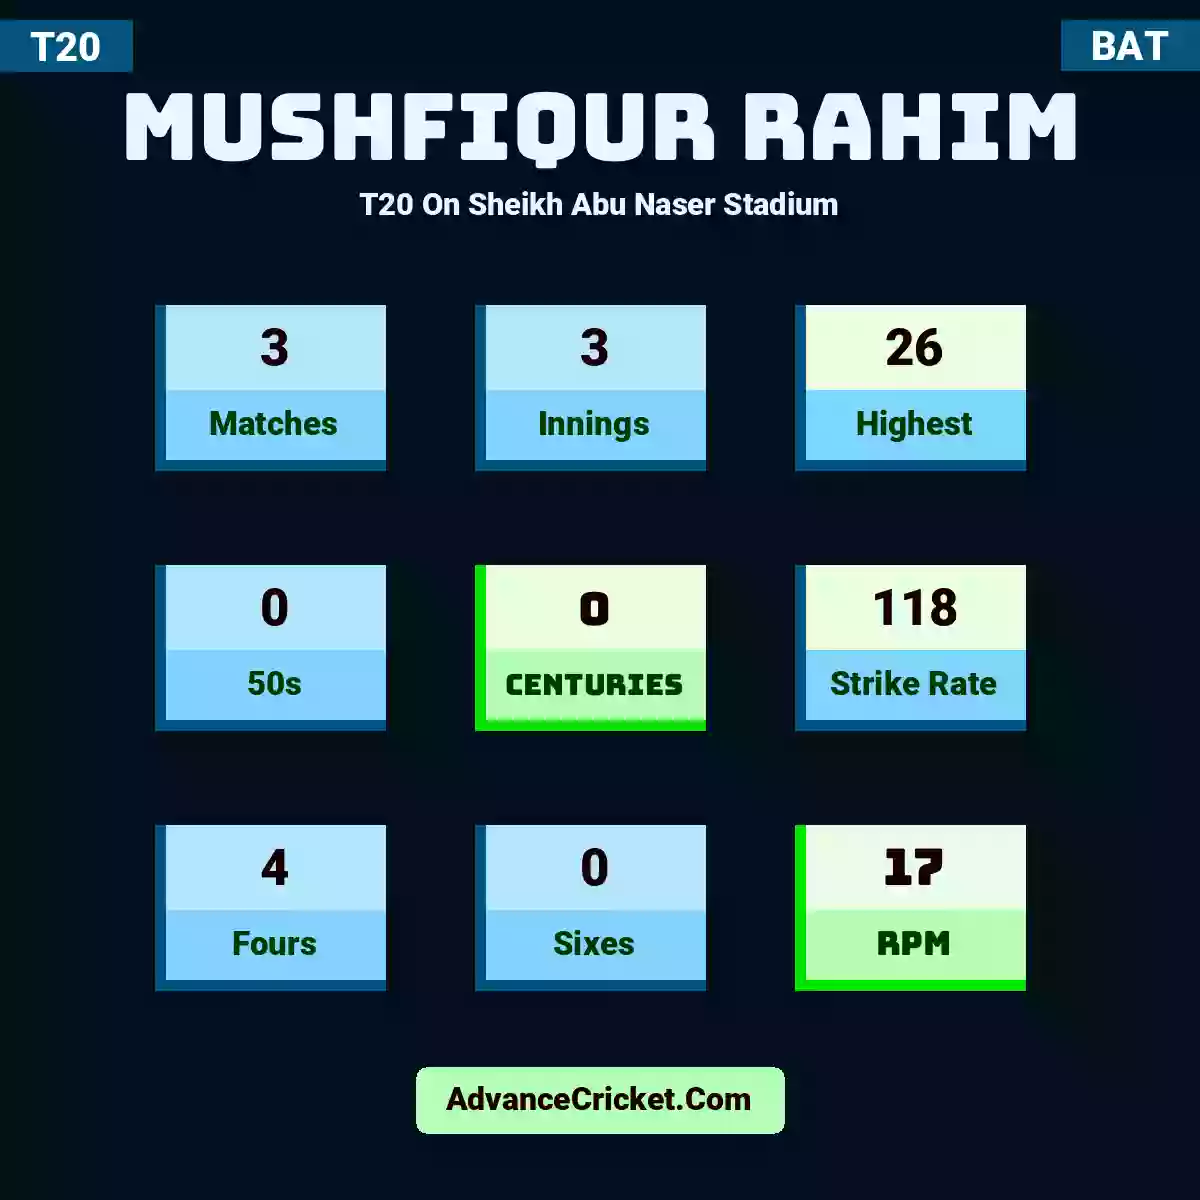 Mushfiqur Rahim T20  On Sheikh Abu Naser Stadium, Mushfiqur Rahim played 3 matches, scored 26 runs as highest, 0 half-centuries, and 0 centuries, with a strike rate of 118. M.Rahim hit 4 fours and 0 sixes, with an RPM of 17.